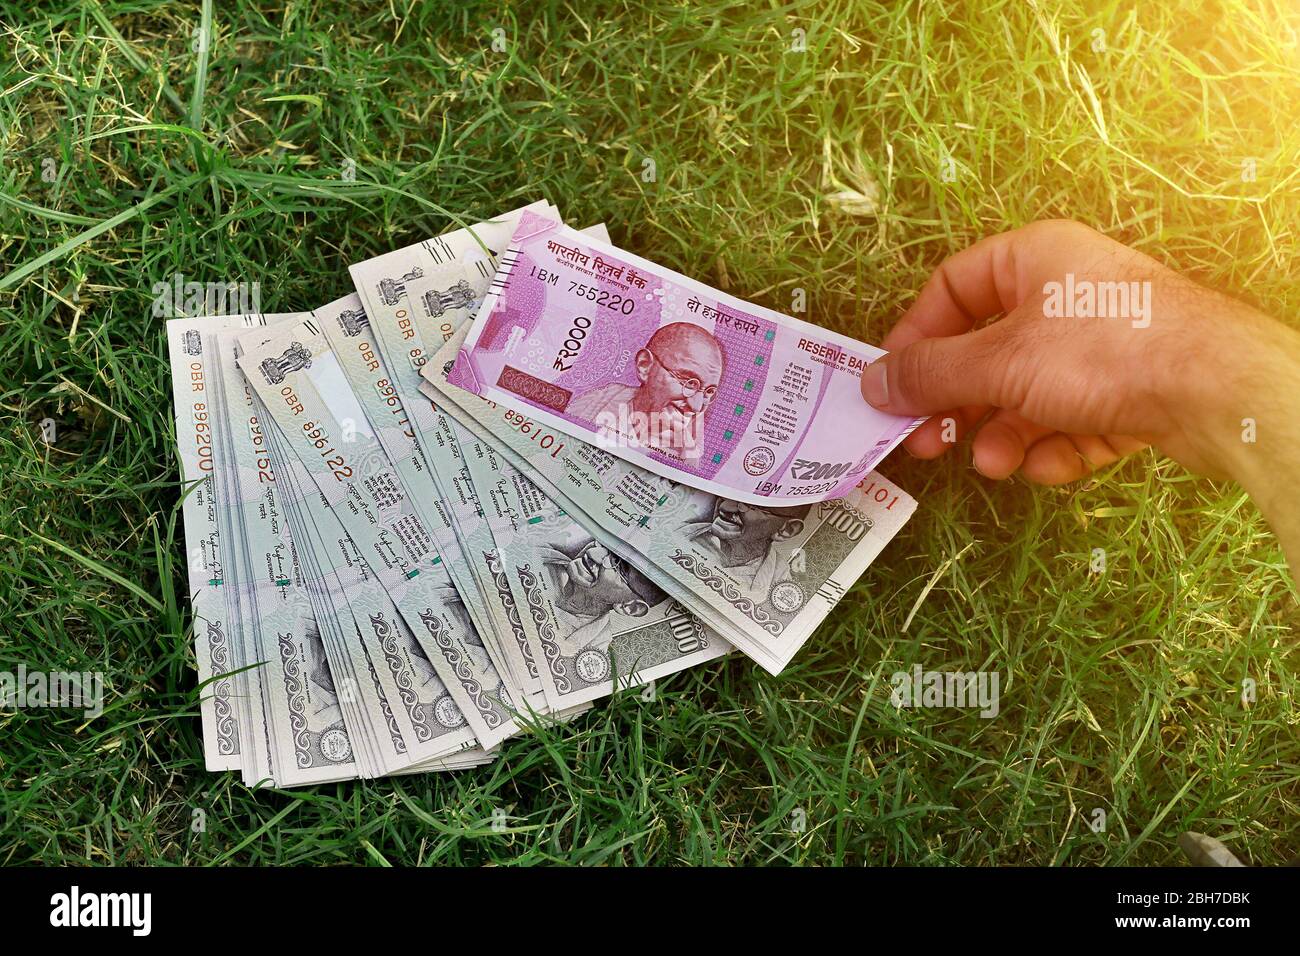 Men holding Indian currency note in hand outdoors in the nature Stock Photo